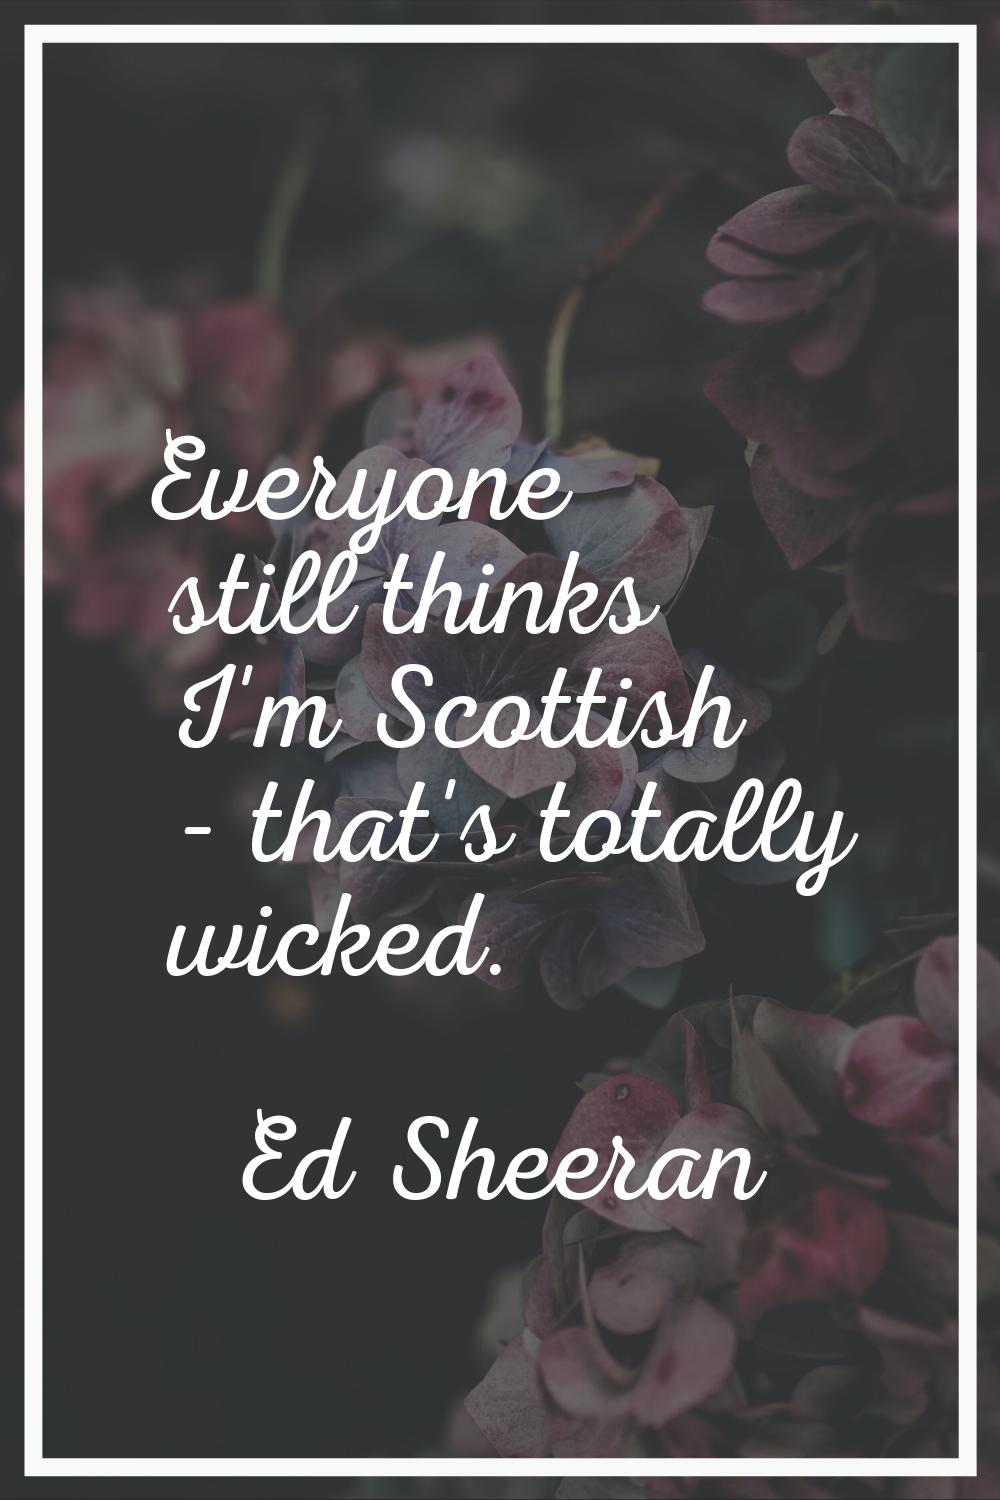 Everyone still thinks I'm Scottish - that's totally wicked.